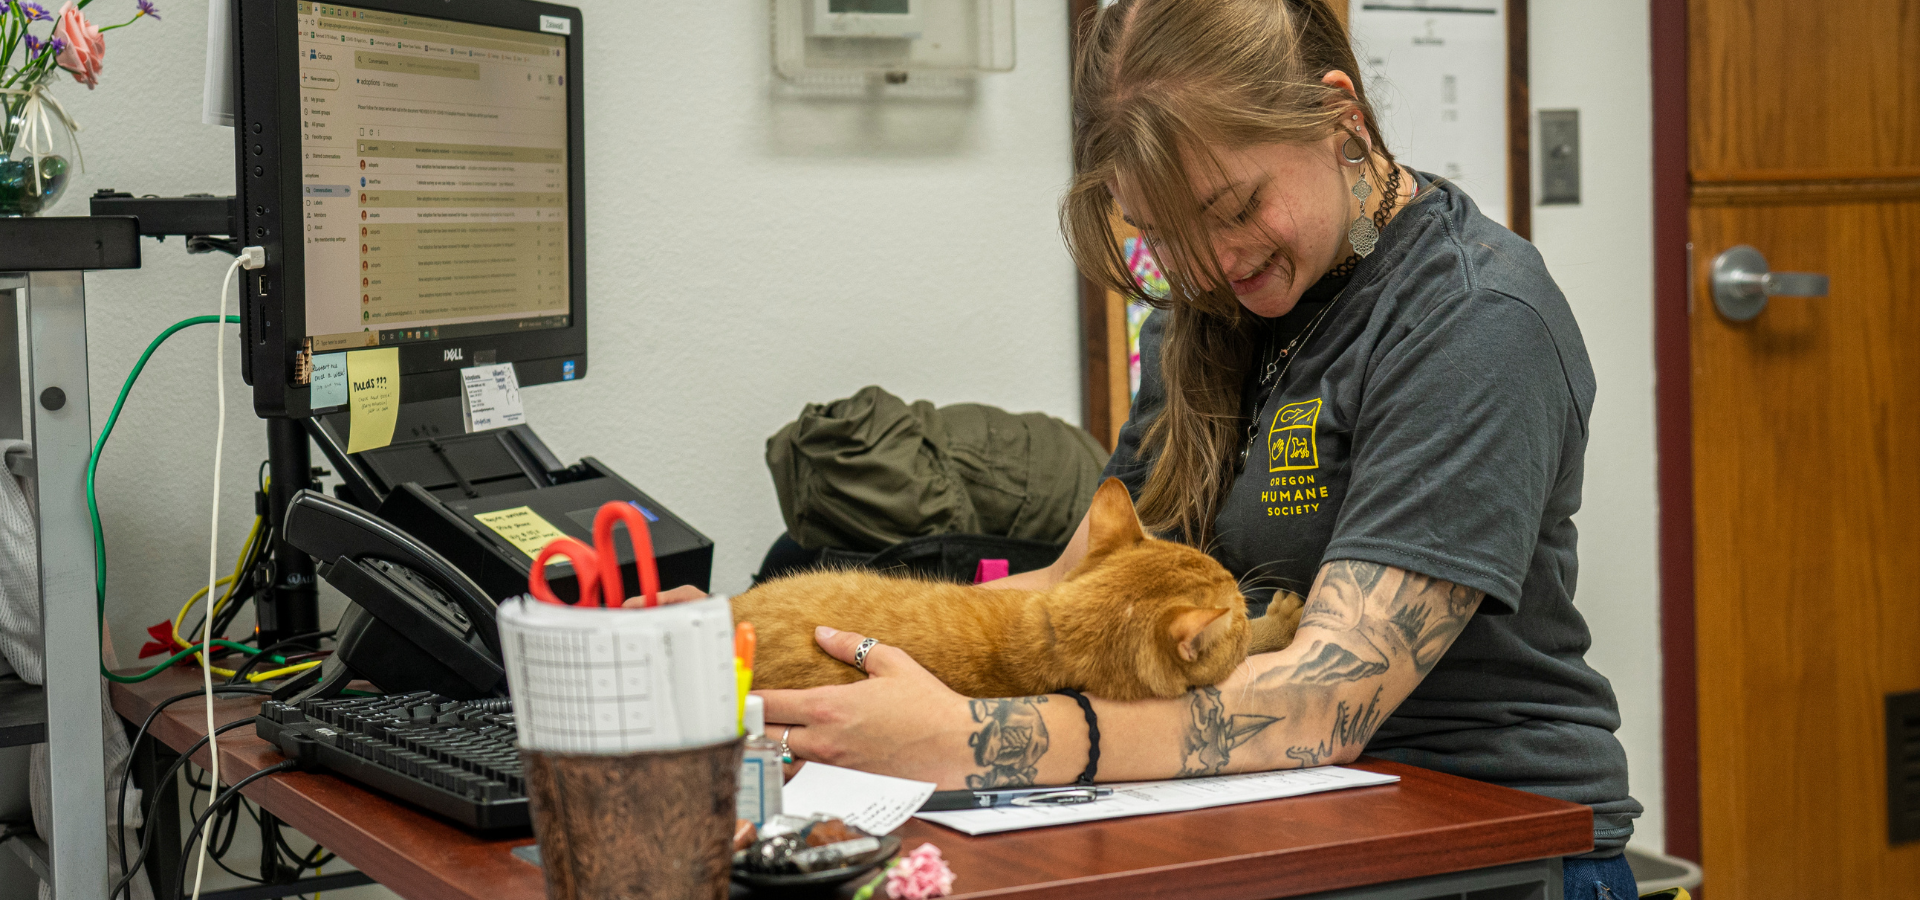 OHS Salem staff member playing with a shelter cat curled up on the front lobby desk